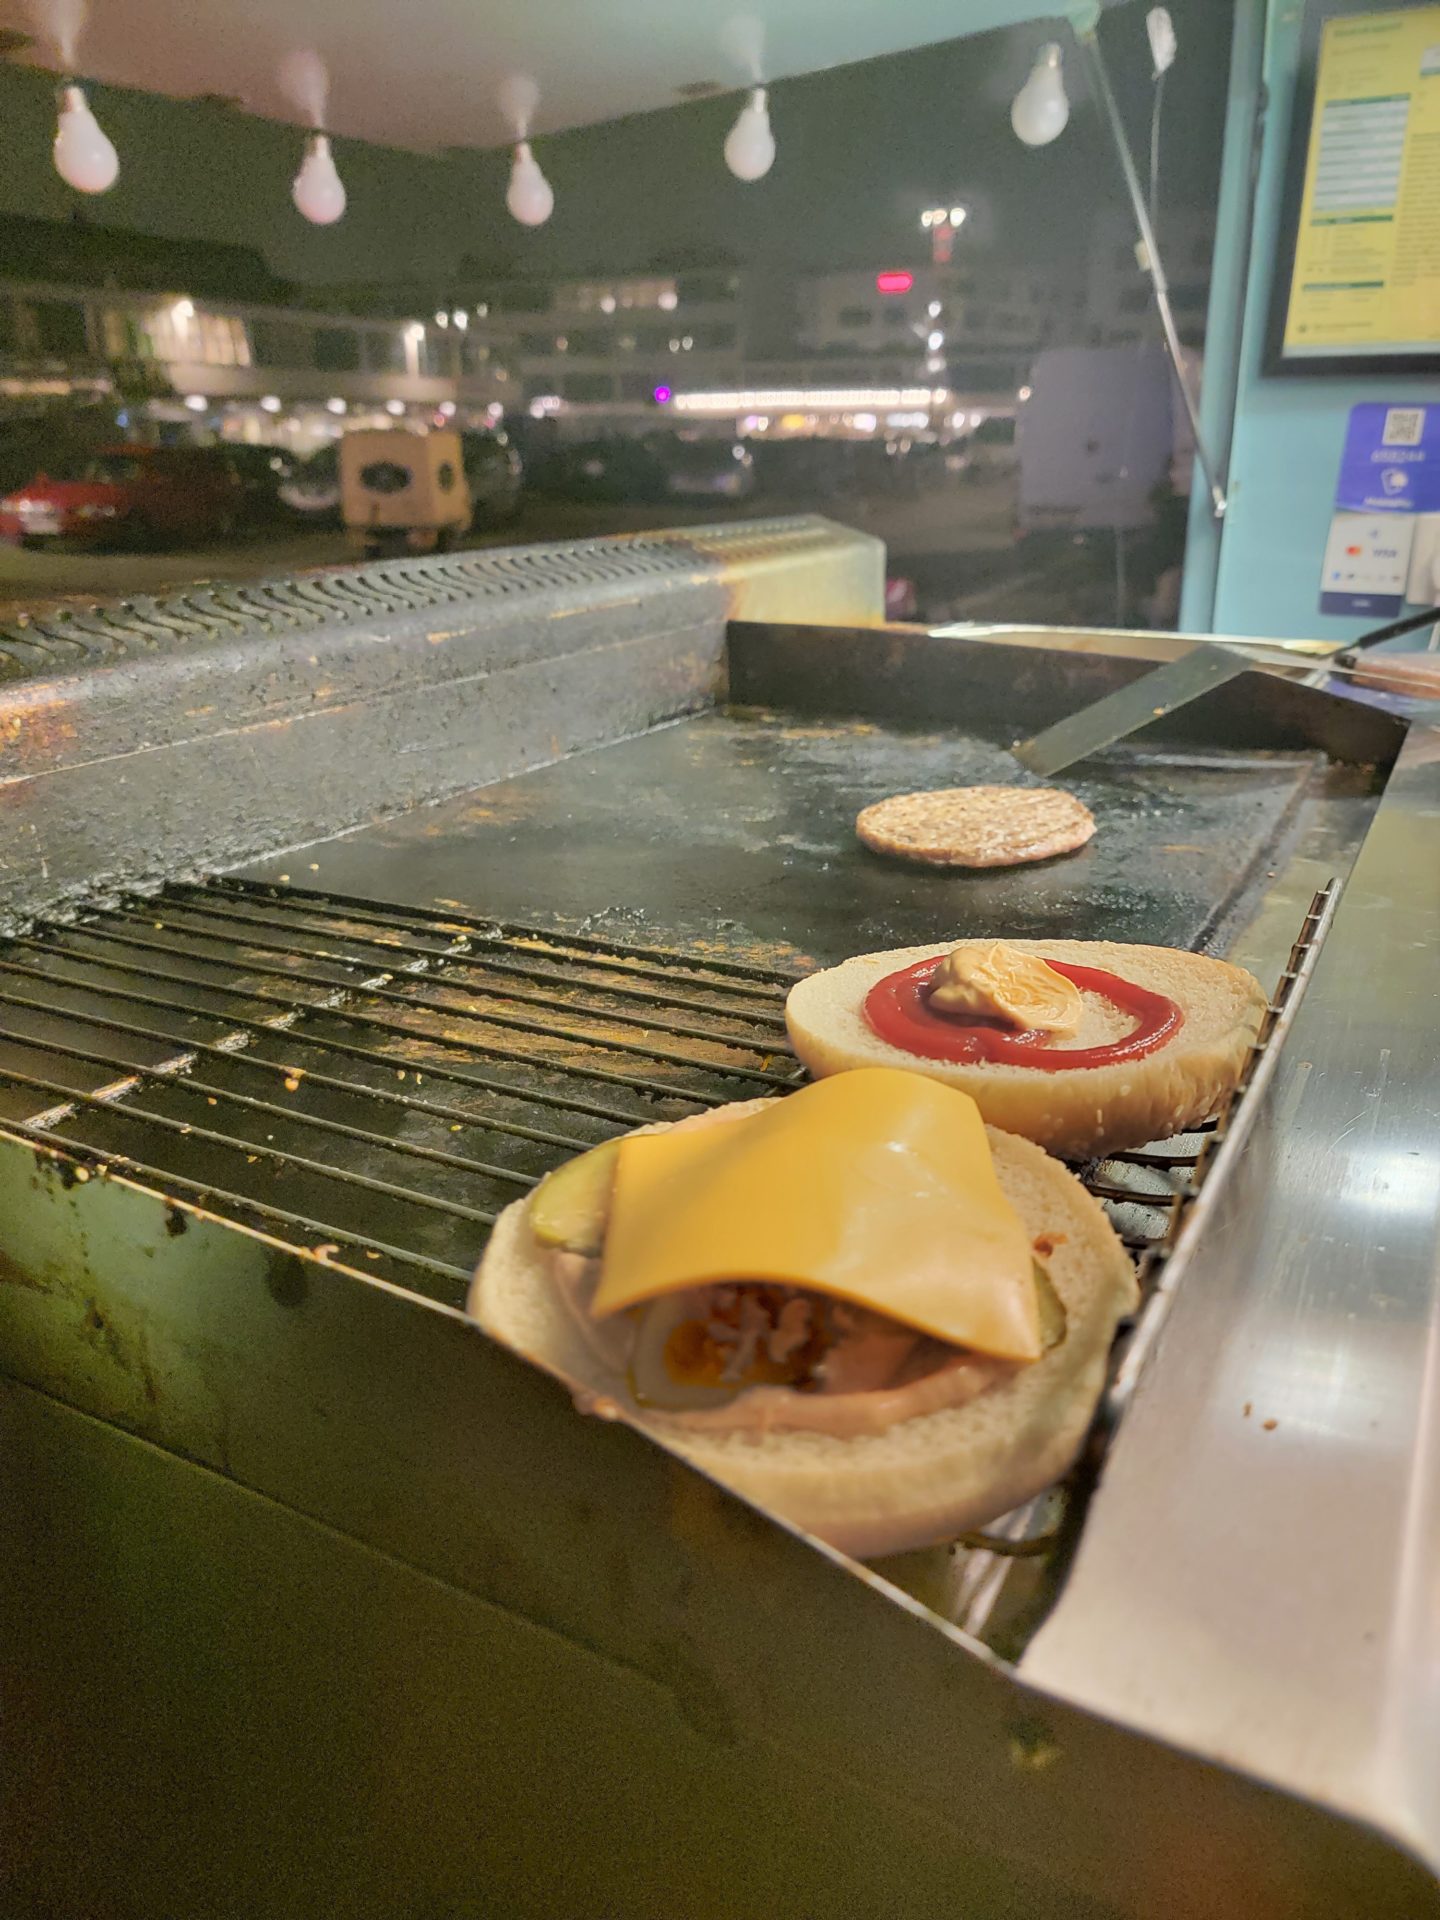 burgers on a grill with a sign in the background